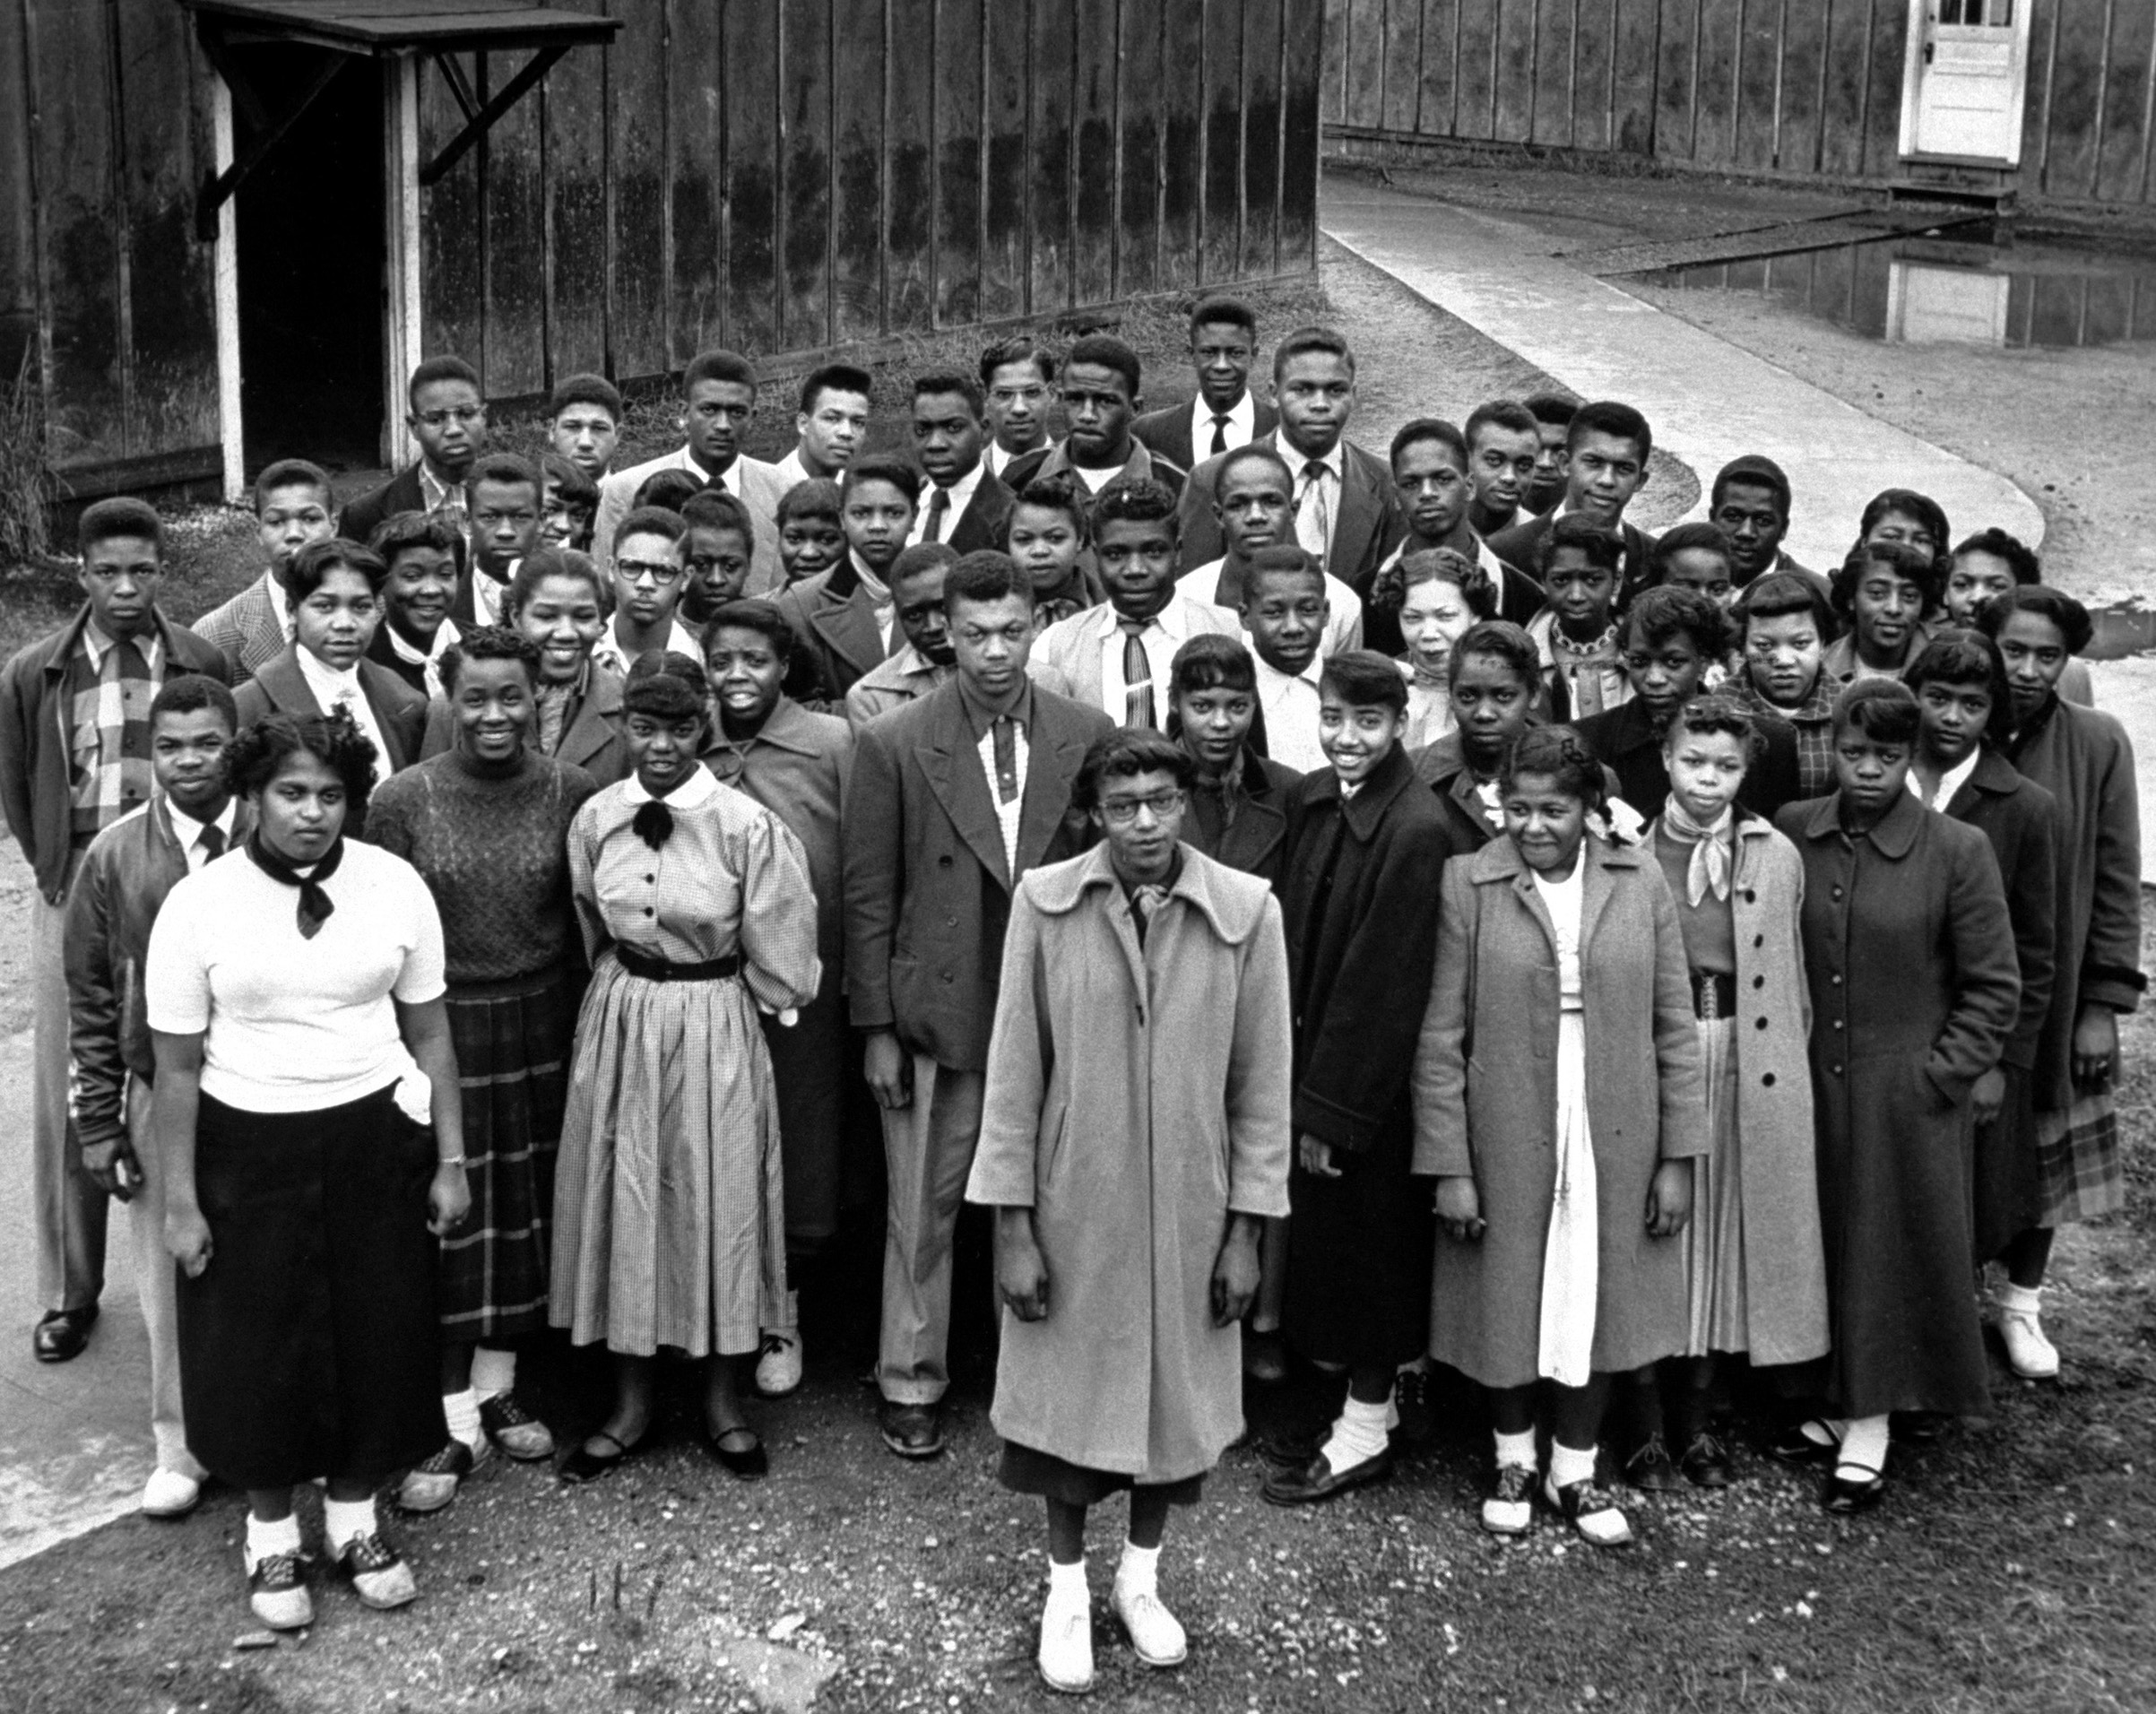 Group portrait of some of the more than 100 students named in the lawsuit filed to seek, initially, repairs for Robert Moton High School, a segregated school in Farmville, Va., March 1953. (Hank Walker—The LIFE Picture Collection/Getty Images)